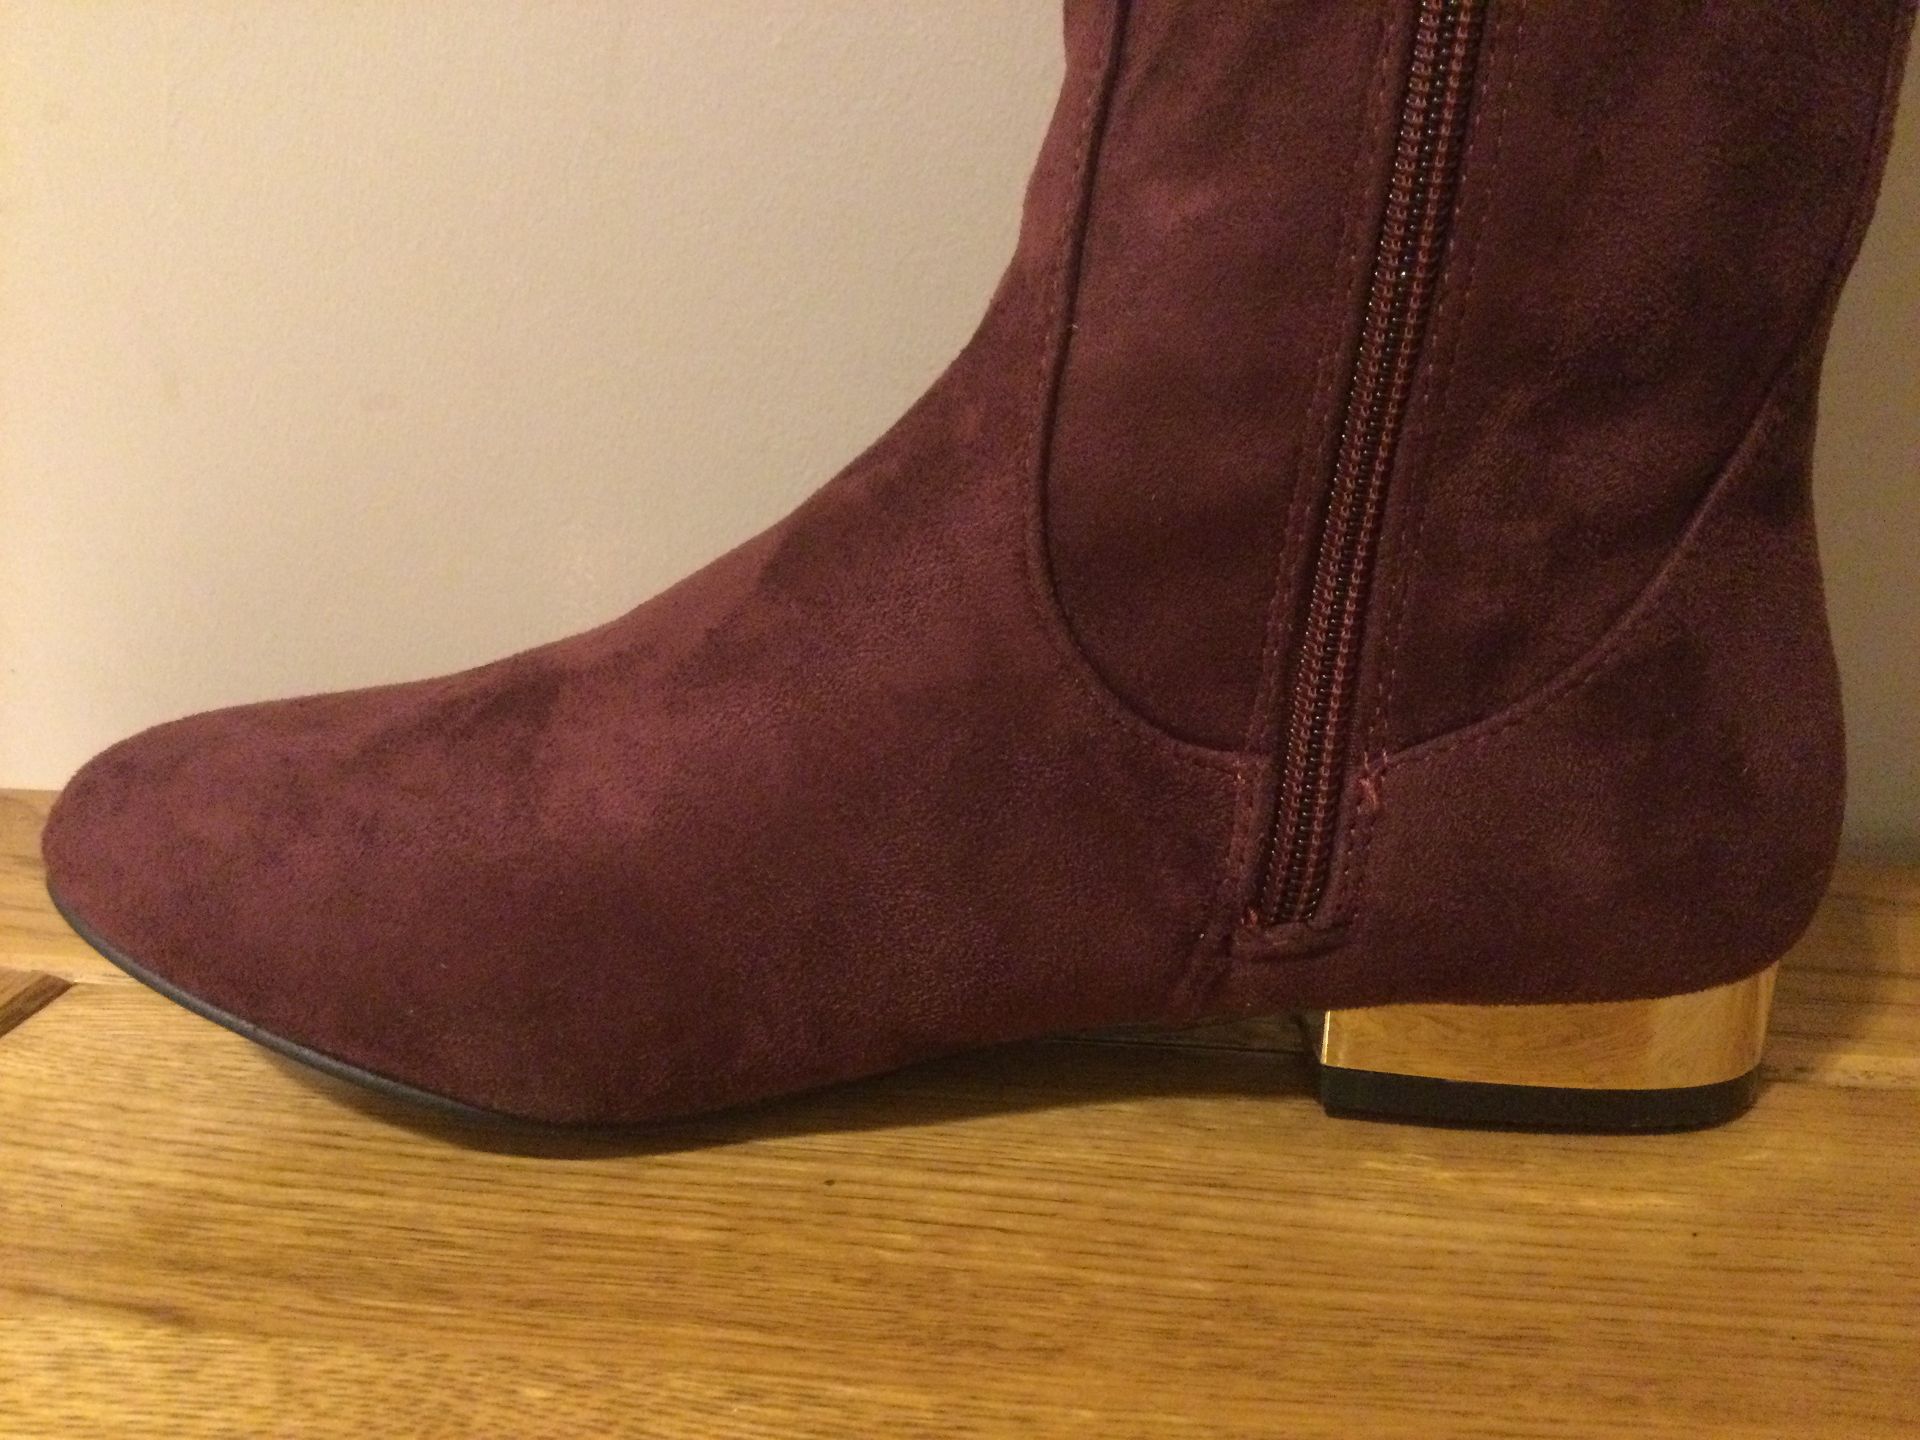 Dolcis “Katie” Long Boots, Low Block Heel, Size 5, Burgundy- New RRP £55.00 - Image 3 of 7